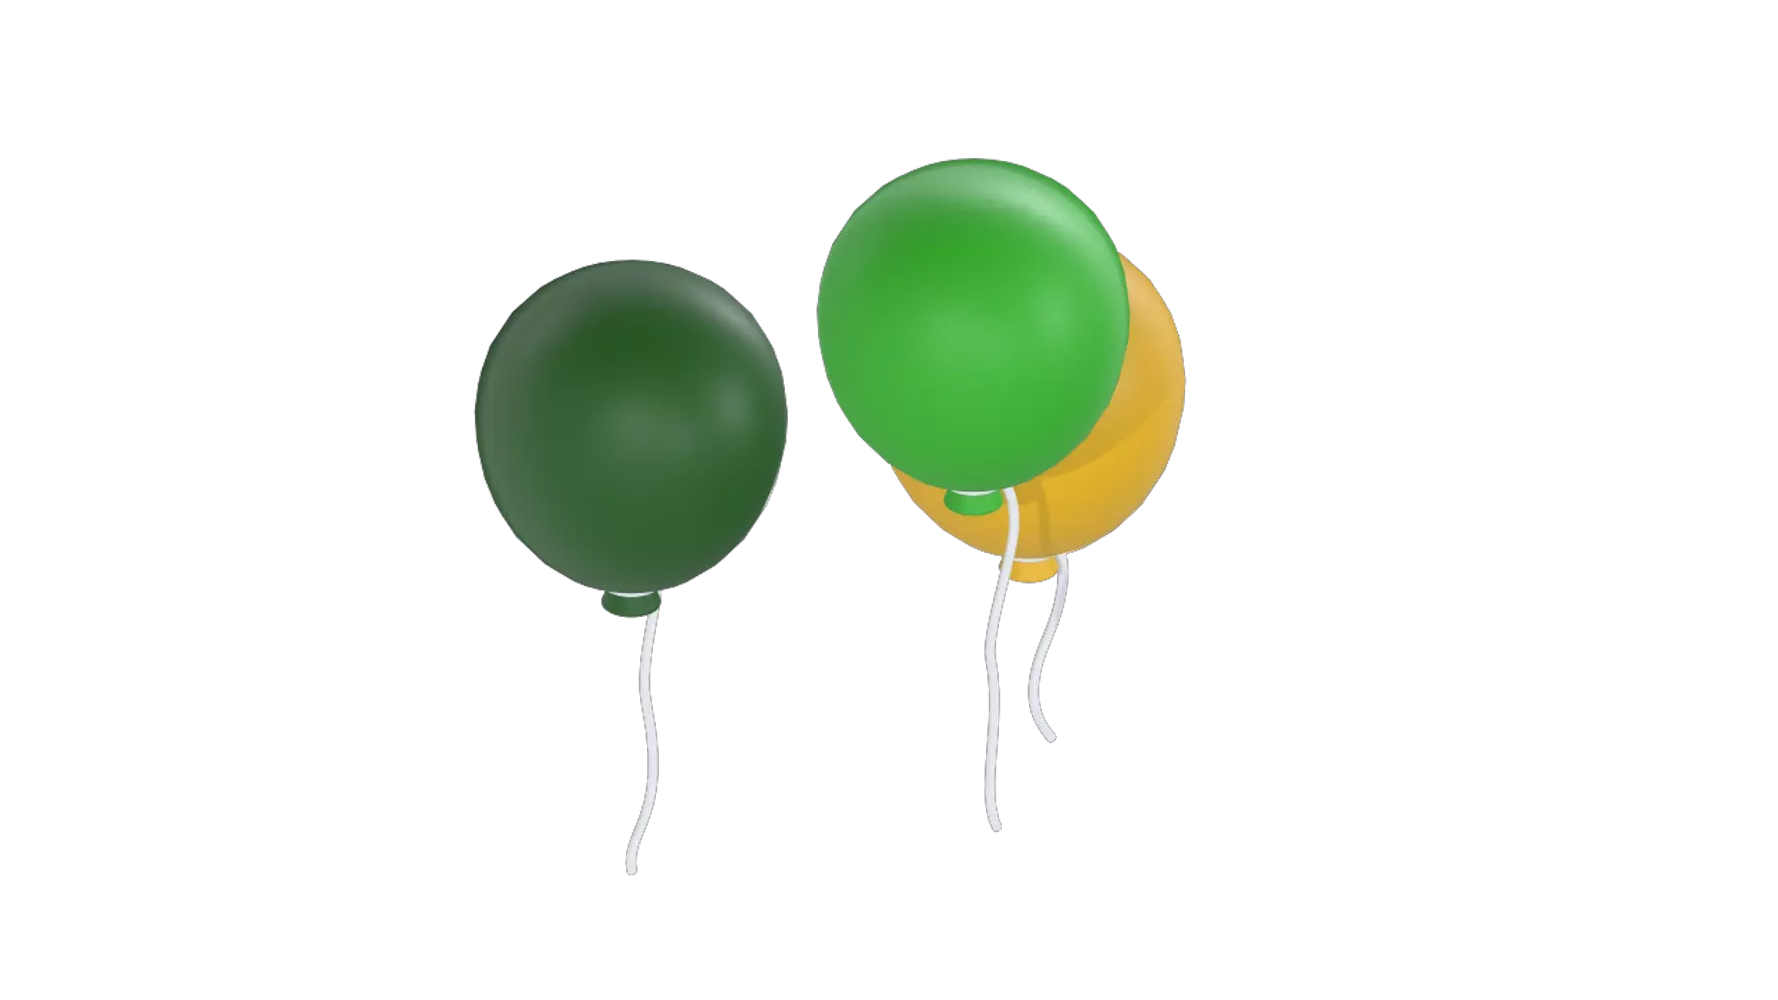 Balloons 3D Graphic